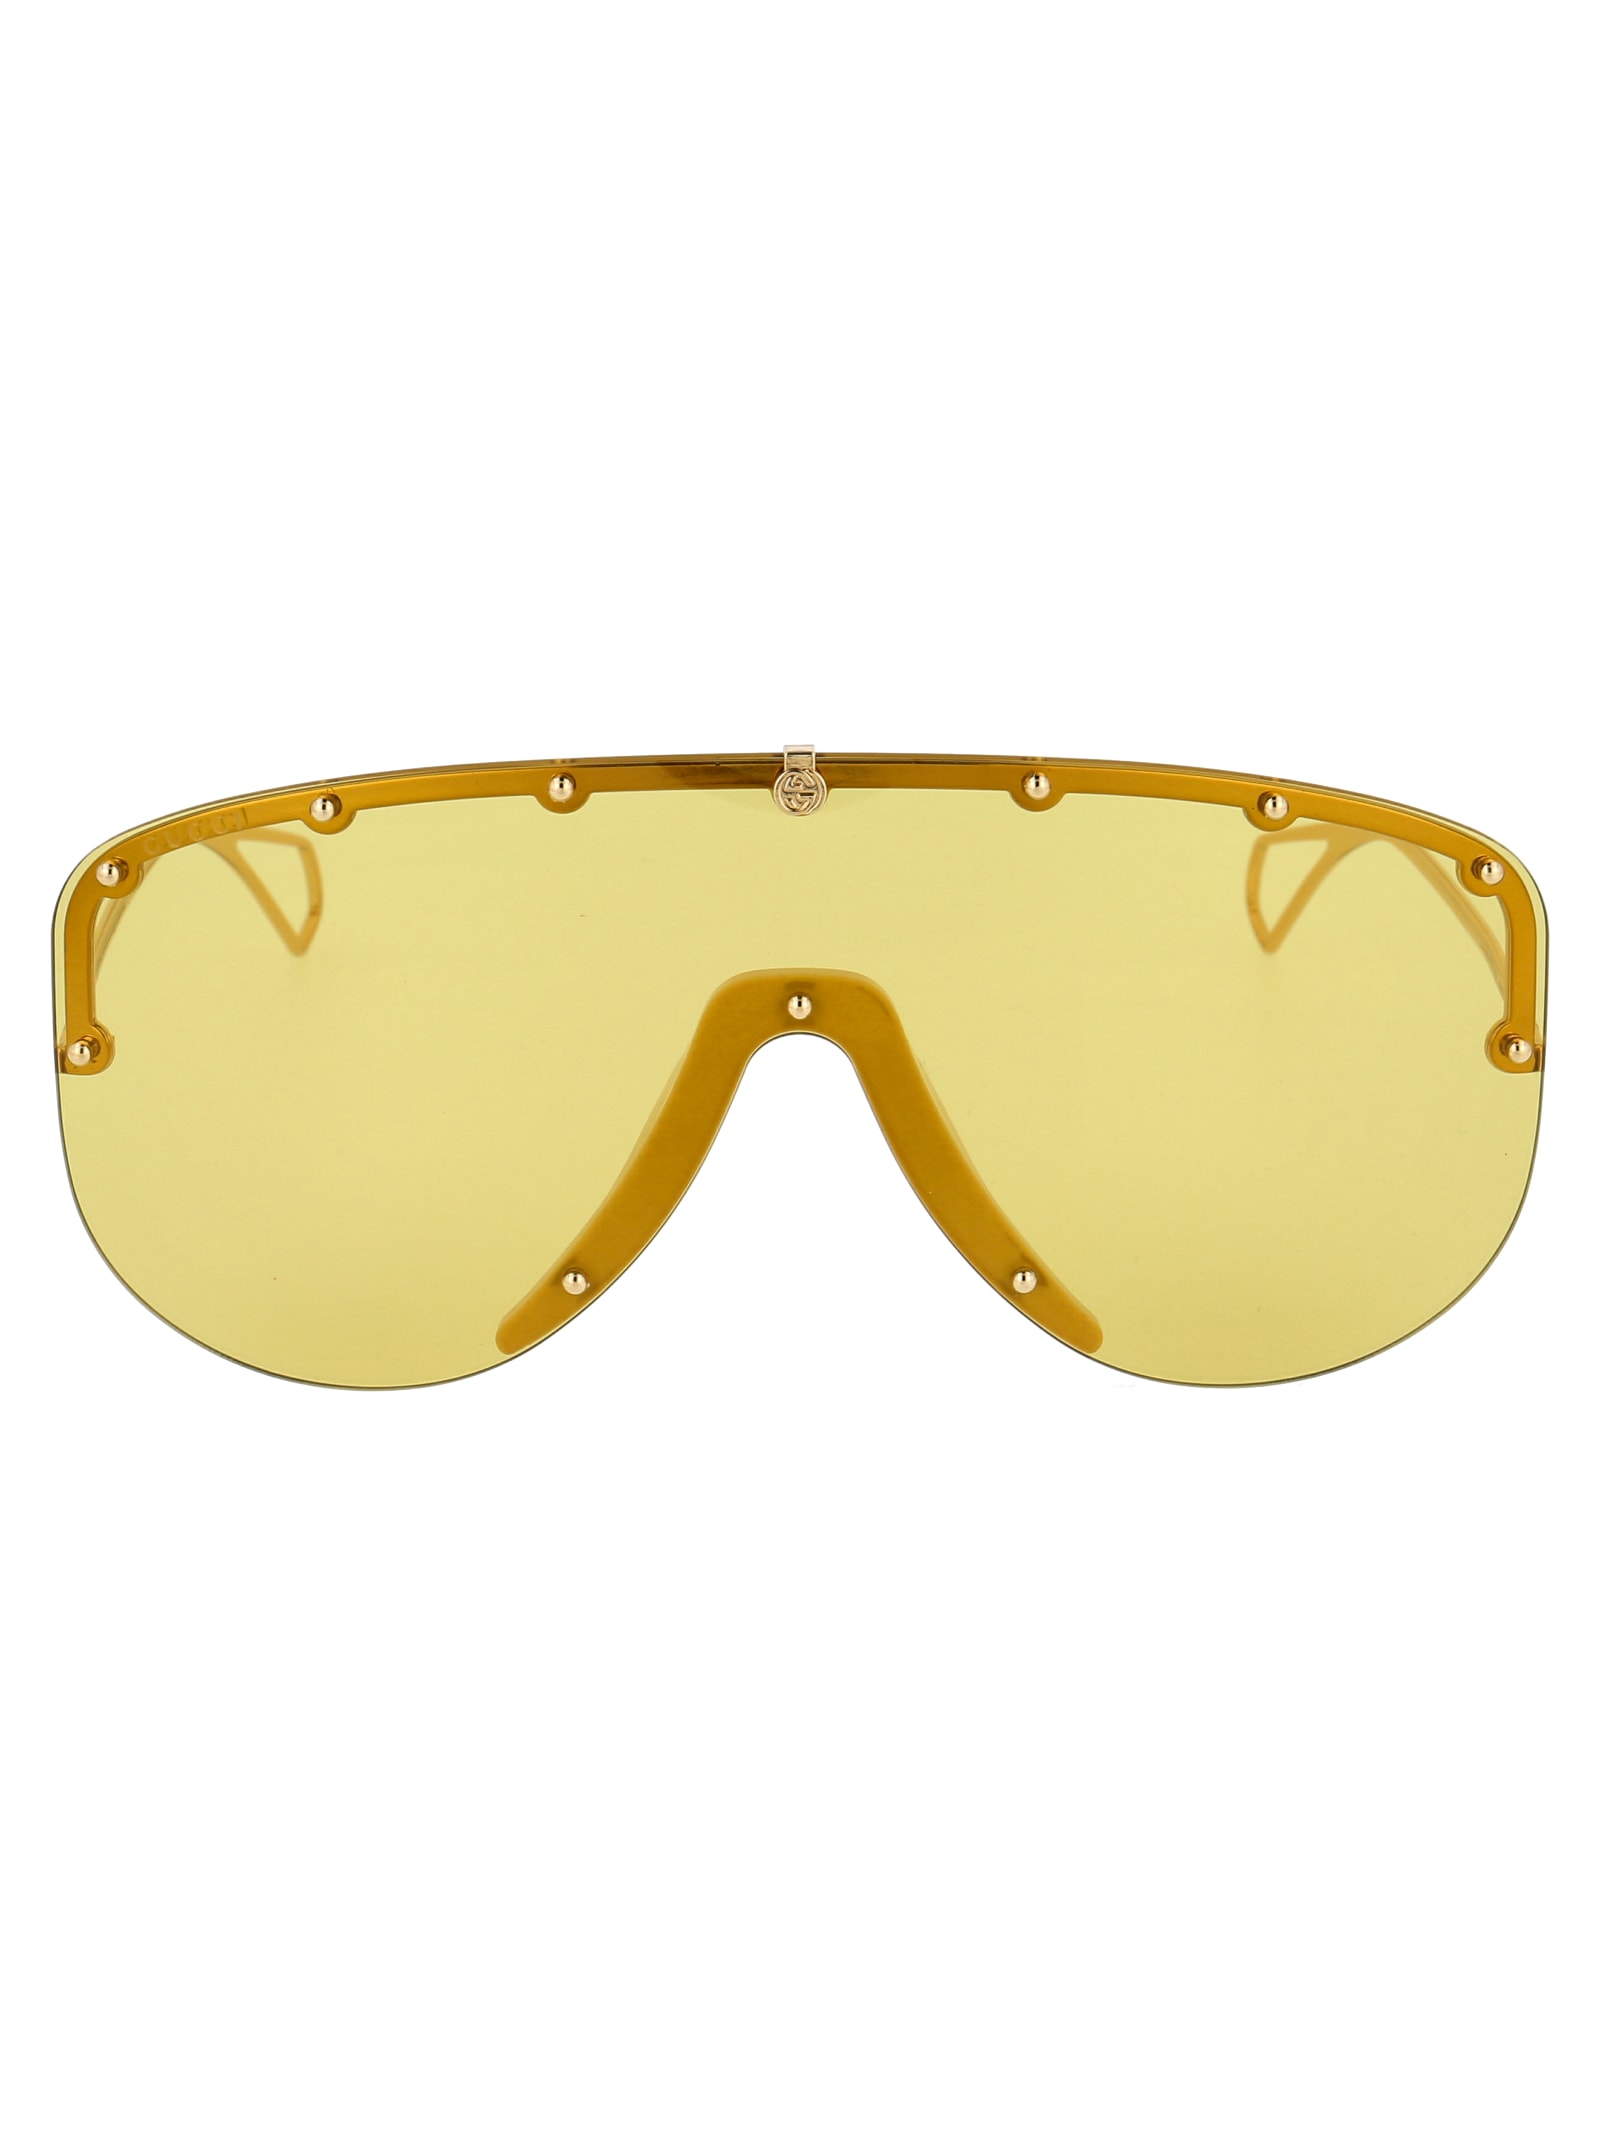 Gucci Sunglasses In Gold Gold Yellow